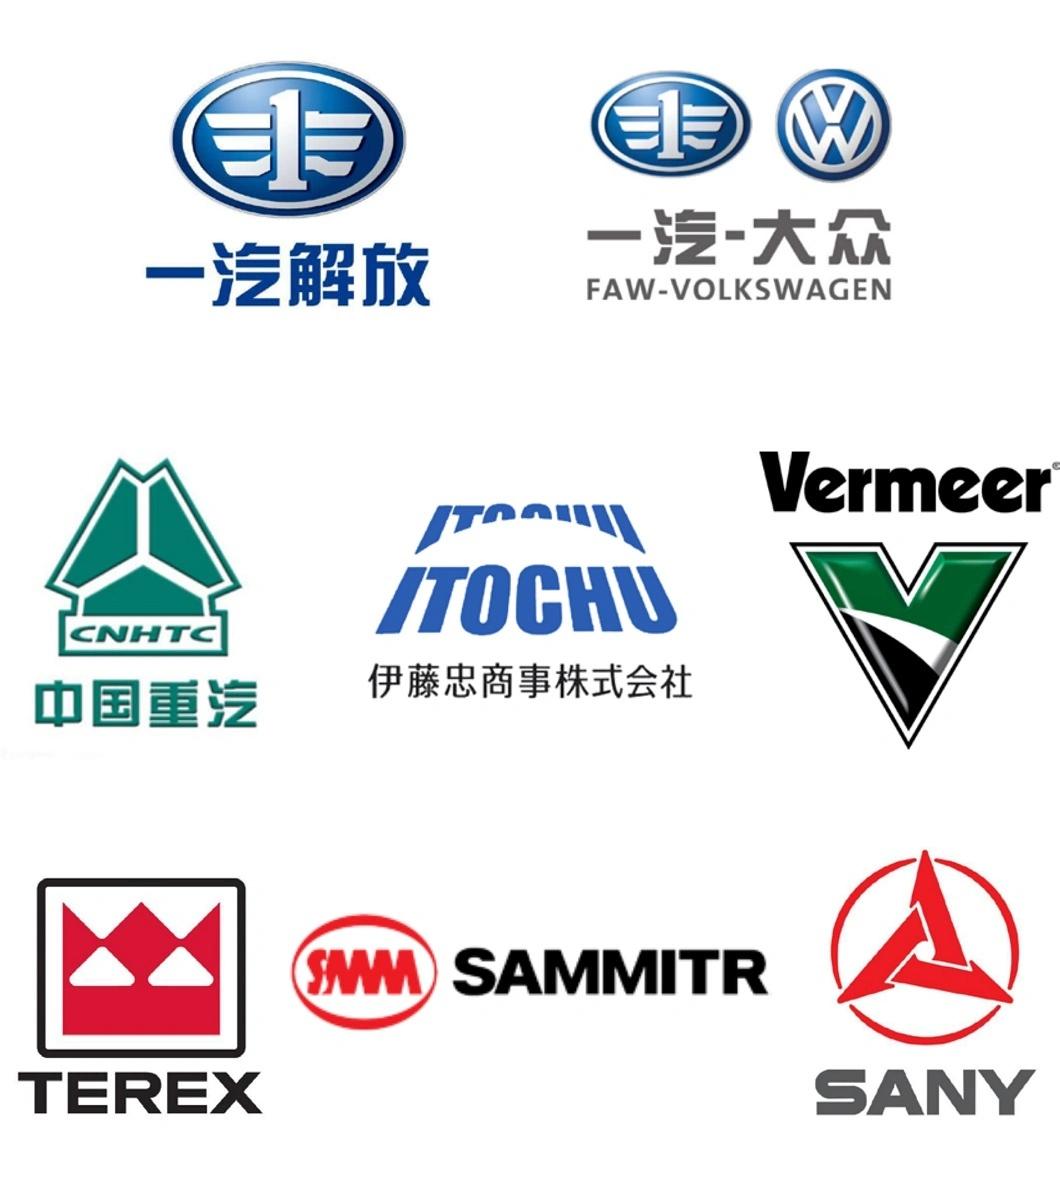 OEM and ODM Machinery/Auto/Forklift/Motor/Car/Valve/Pump/Trailer/Truck Accessories/Spare Parts in Investment/Lost Wax/Precision Casting/Stainless Steel/Adi/Cast